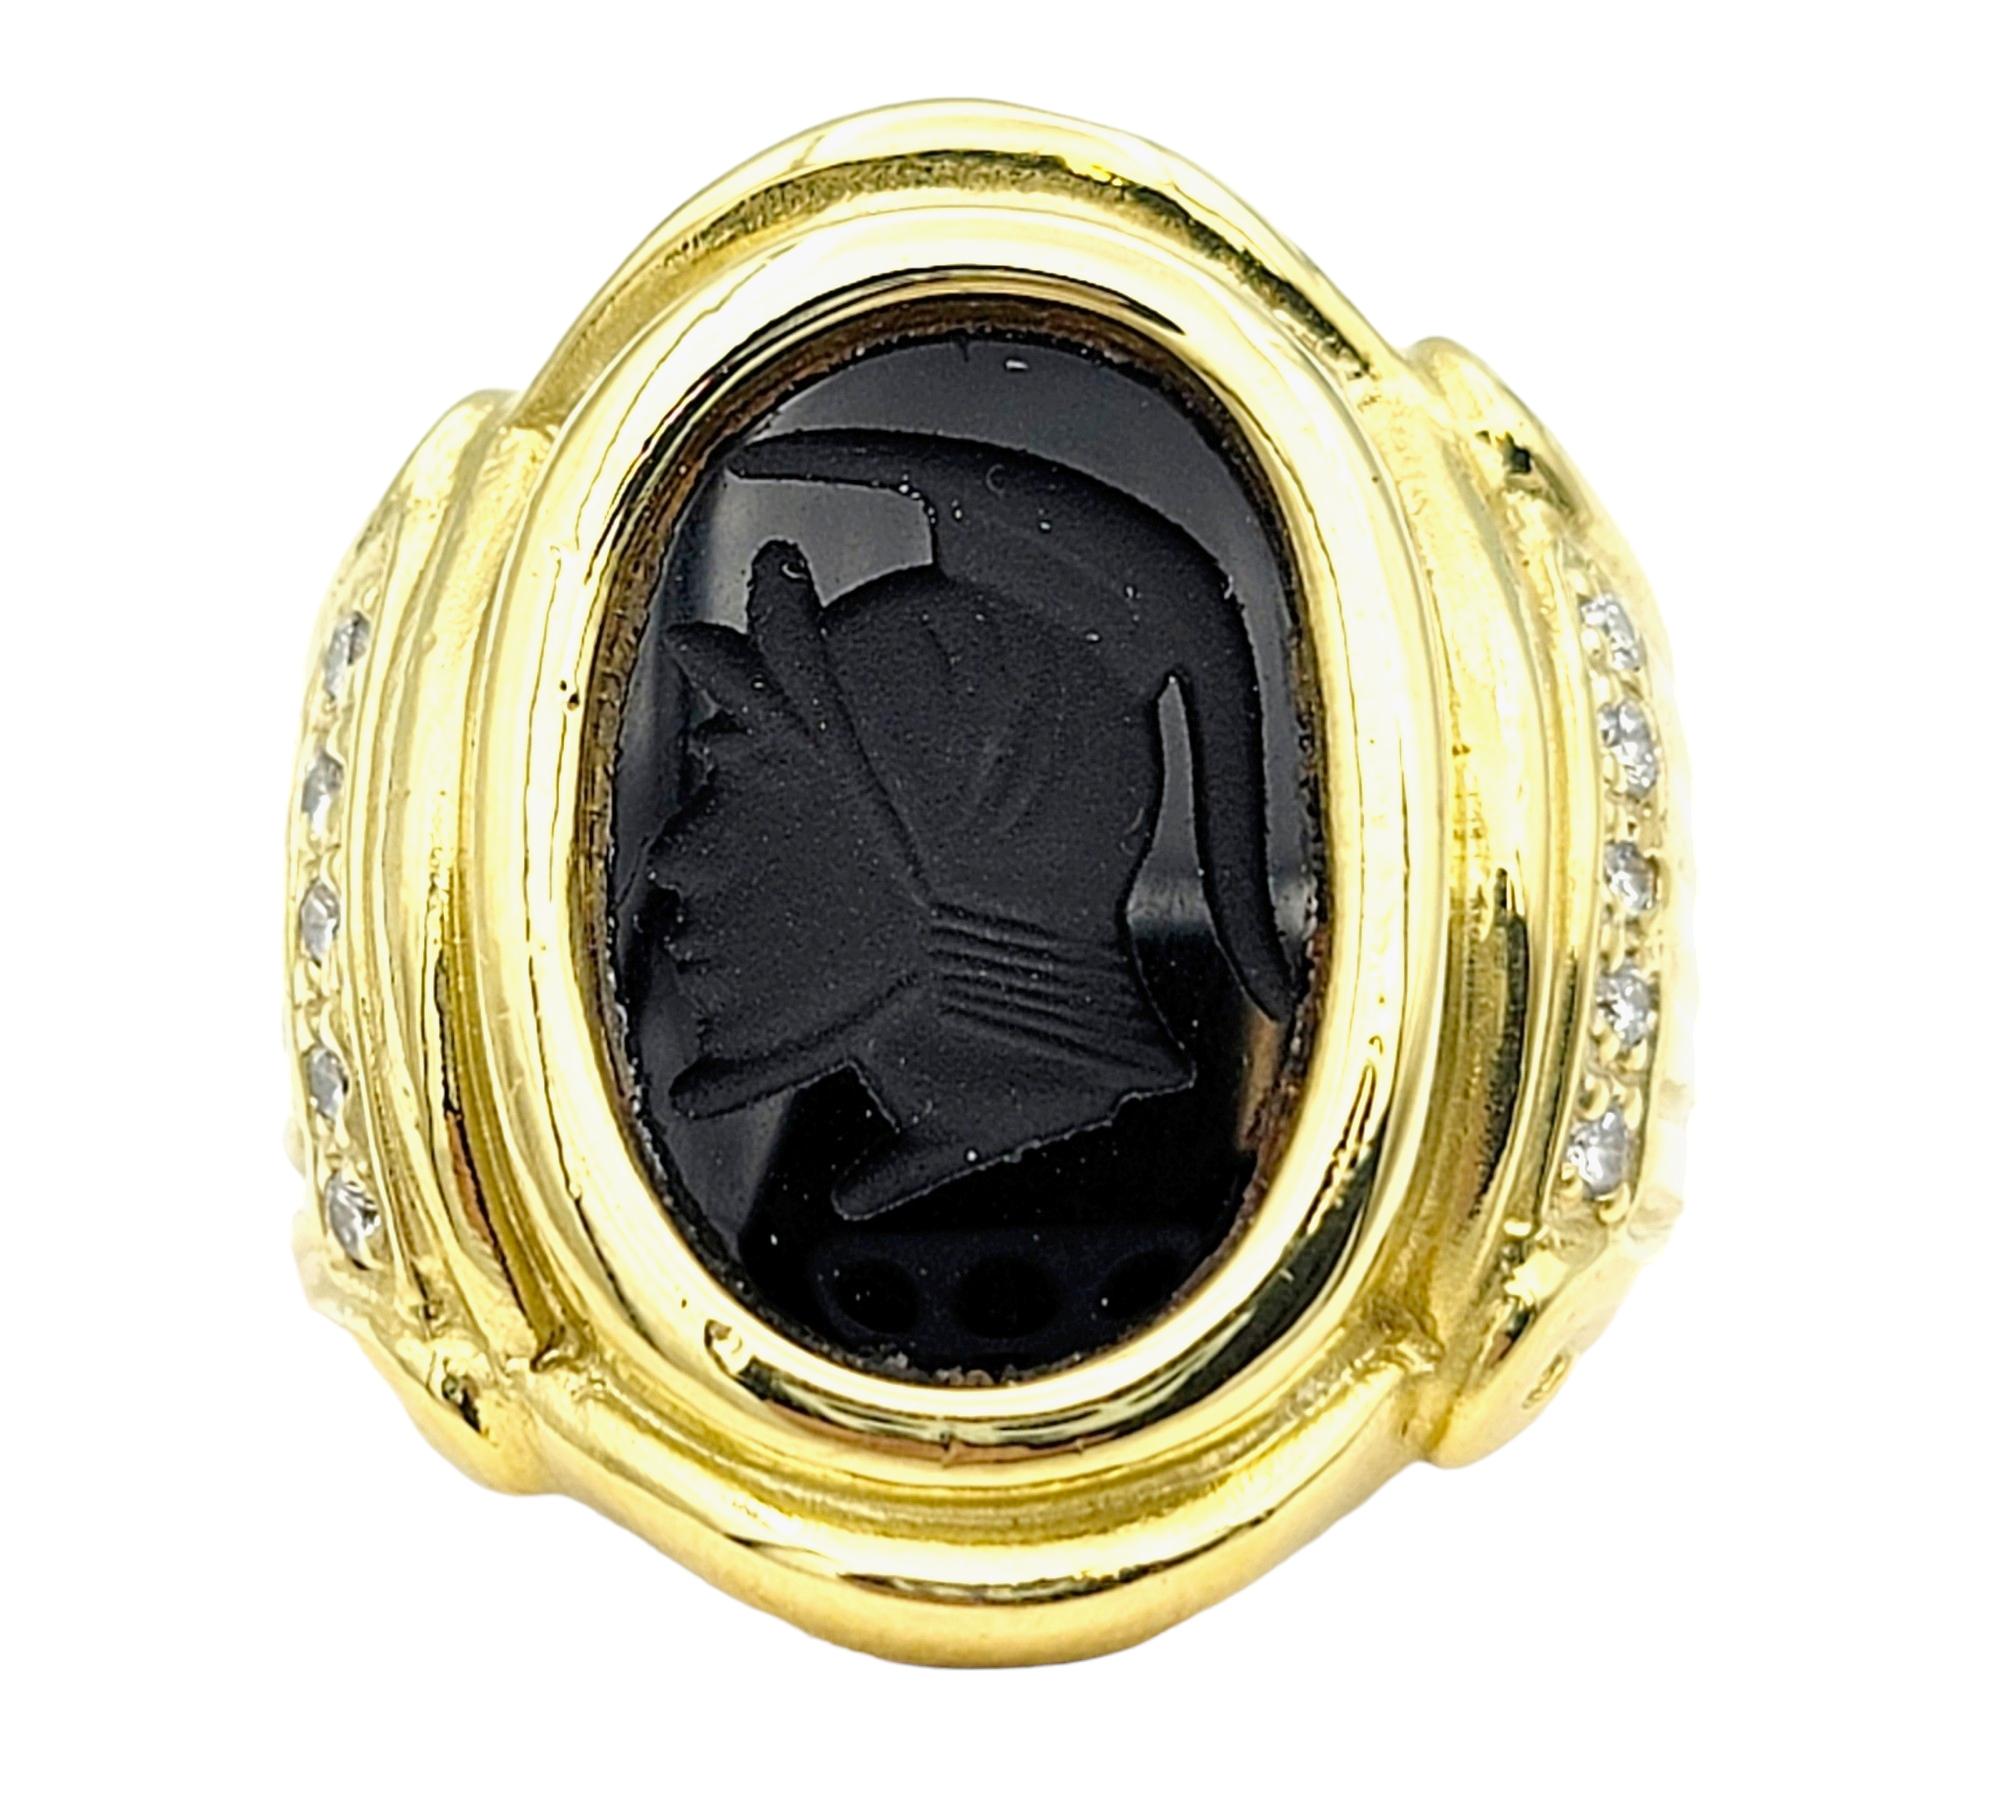 Ring size: 6.25

We absolutely love this unique unisex ring -  a timeless piece that effortlessly blends history and luxury. Crafted in lustrous 18 karat yellow gold, this captivating ring showcases a meticulously carved onyx intaglio featuring a